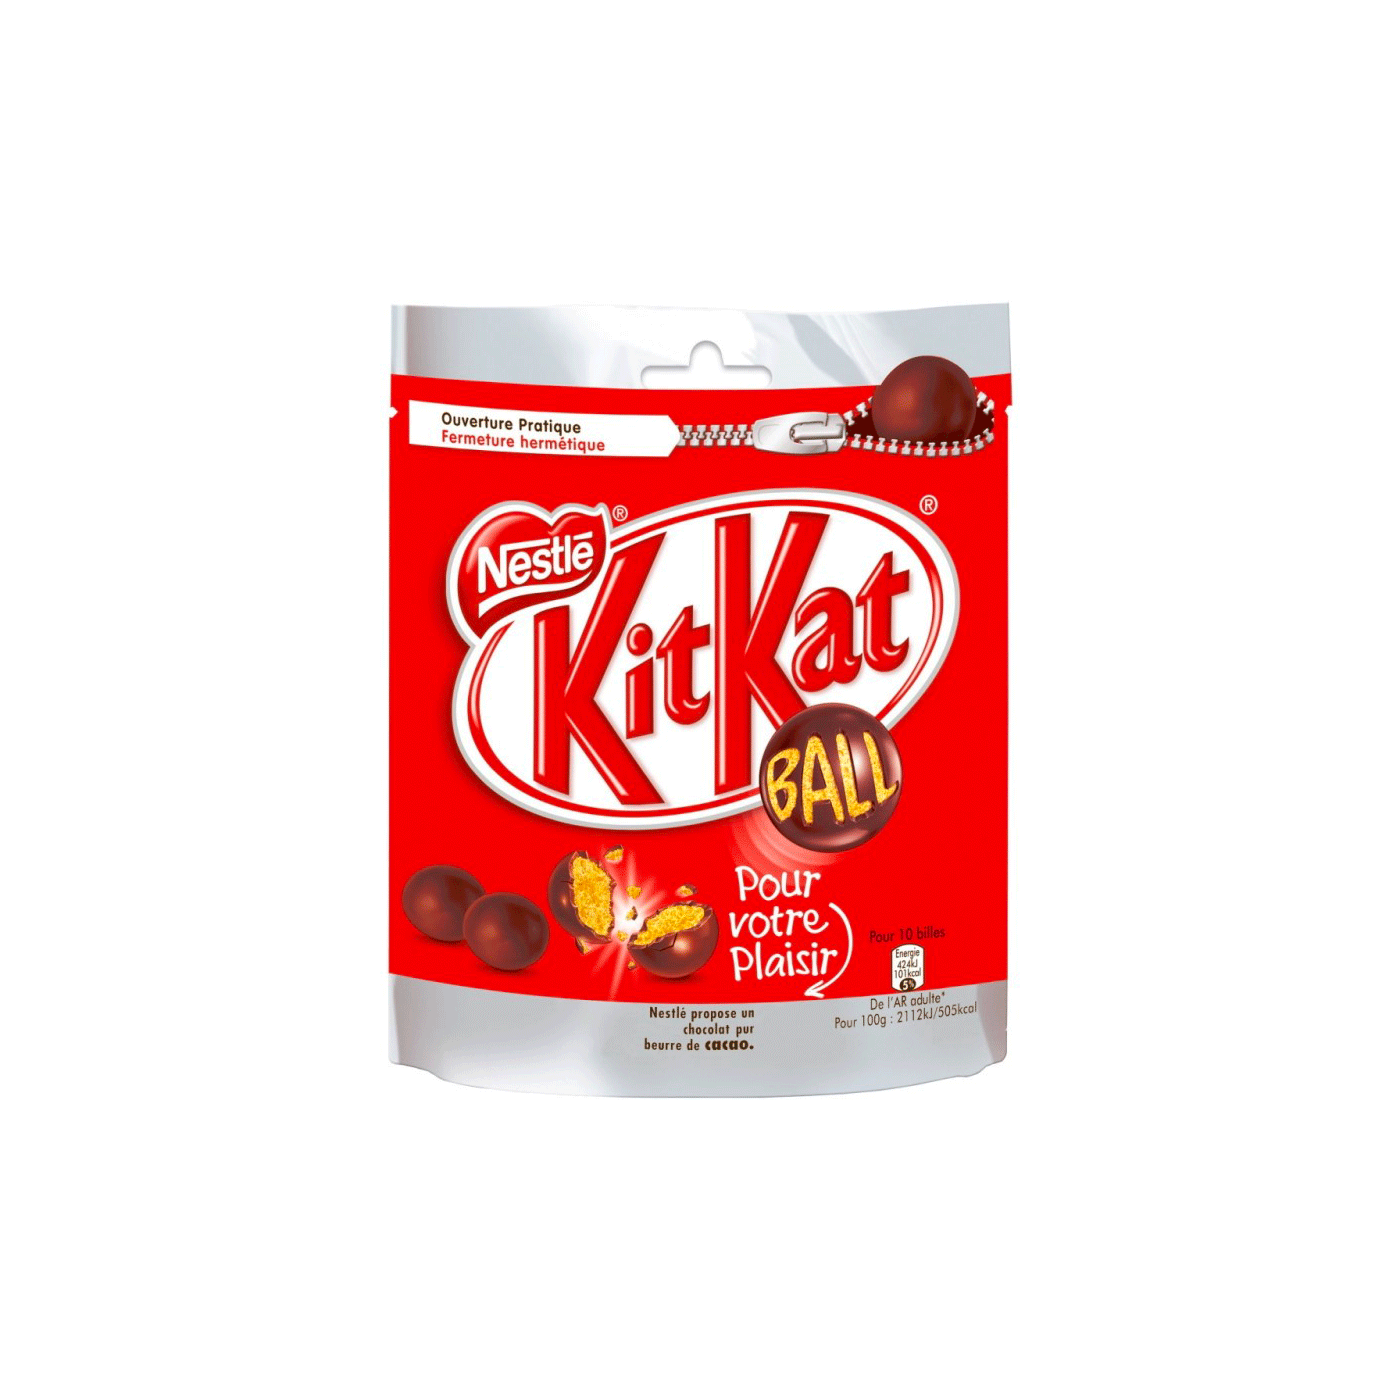 https://www.chezvous.re/content/images/thumbs/5f2ab19f60f9c41098d27e9a_kit-kat-ball-250g-big-bag.png